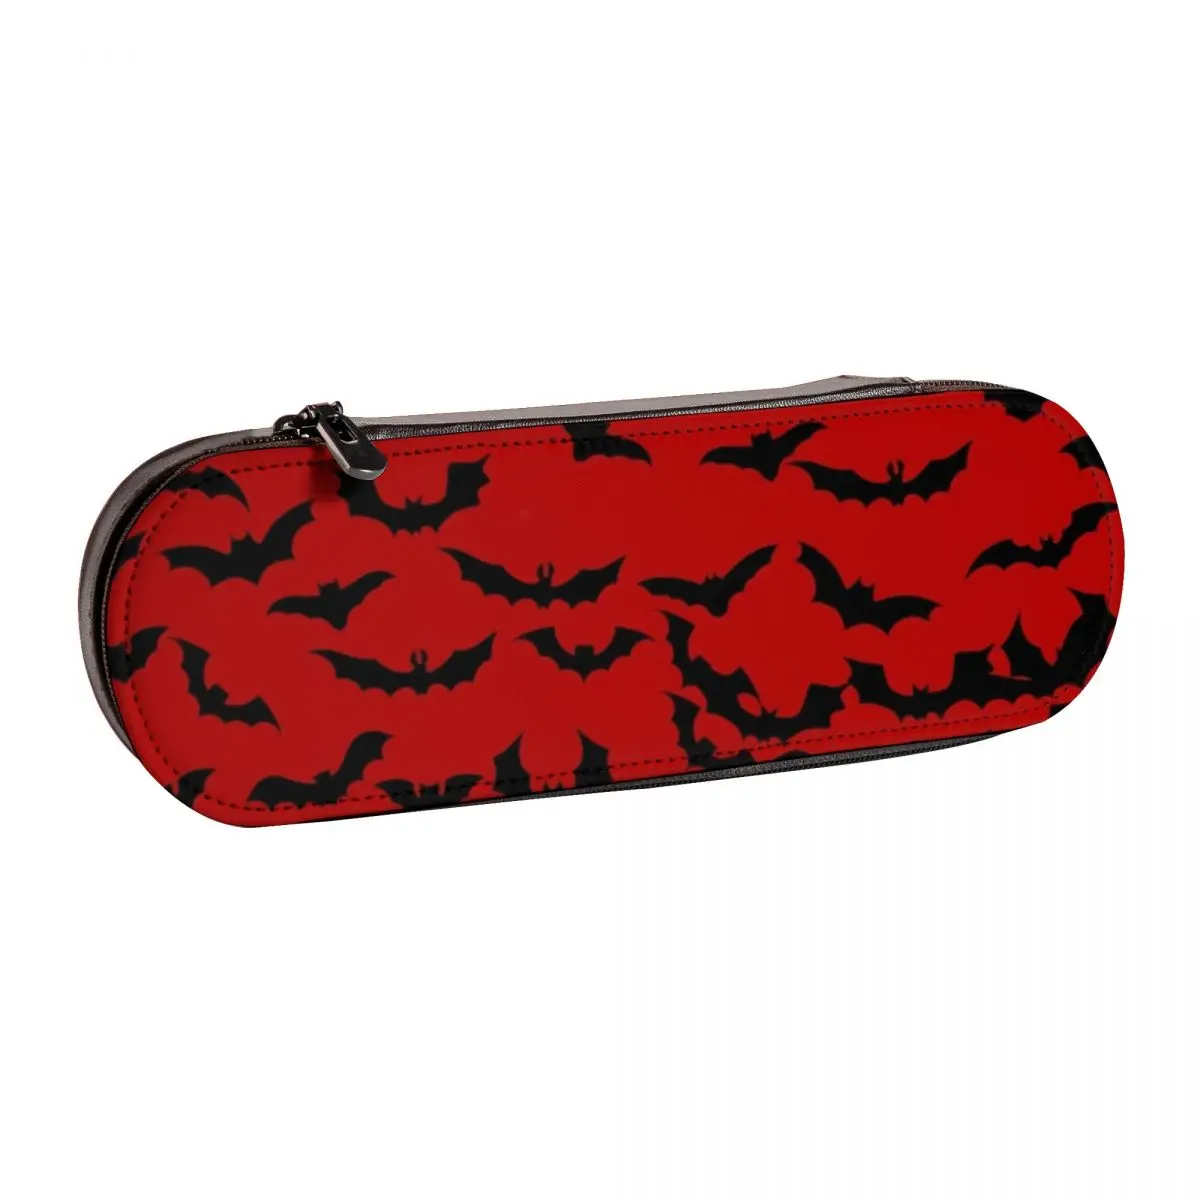 

Just Bats Red Pencil Case Spooky Halloween Print Fashion Leather Pencil Box For Teens College Pen Organizer